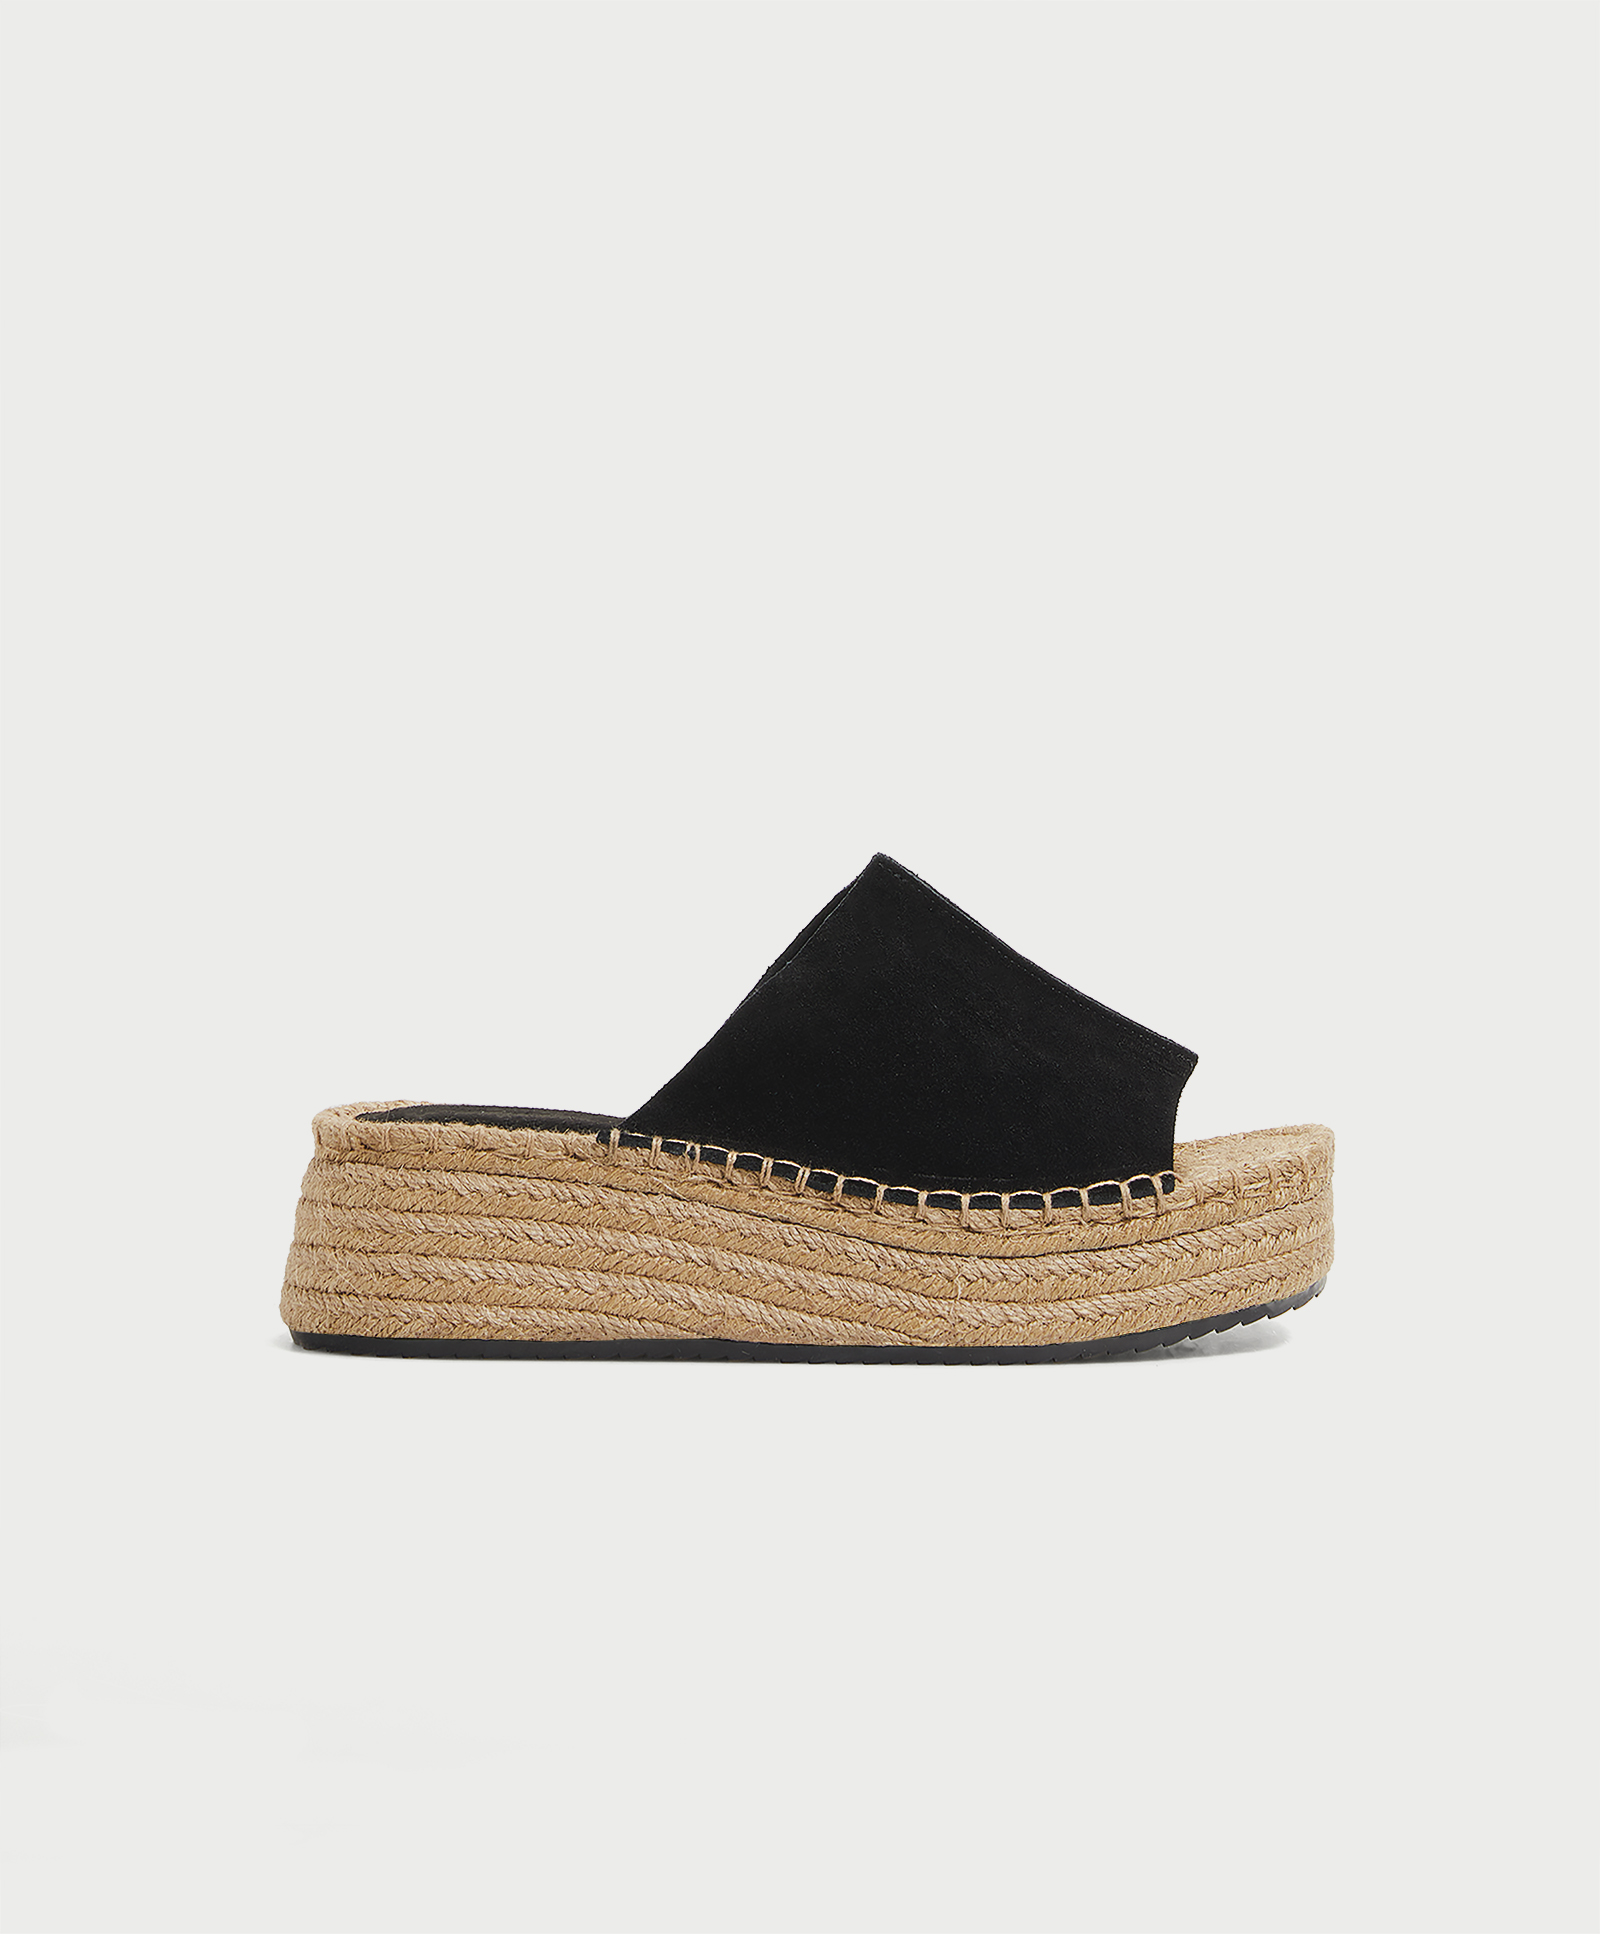 Split-leather and jute wedges